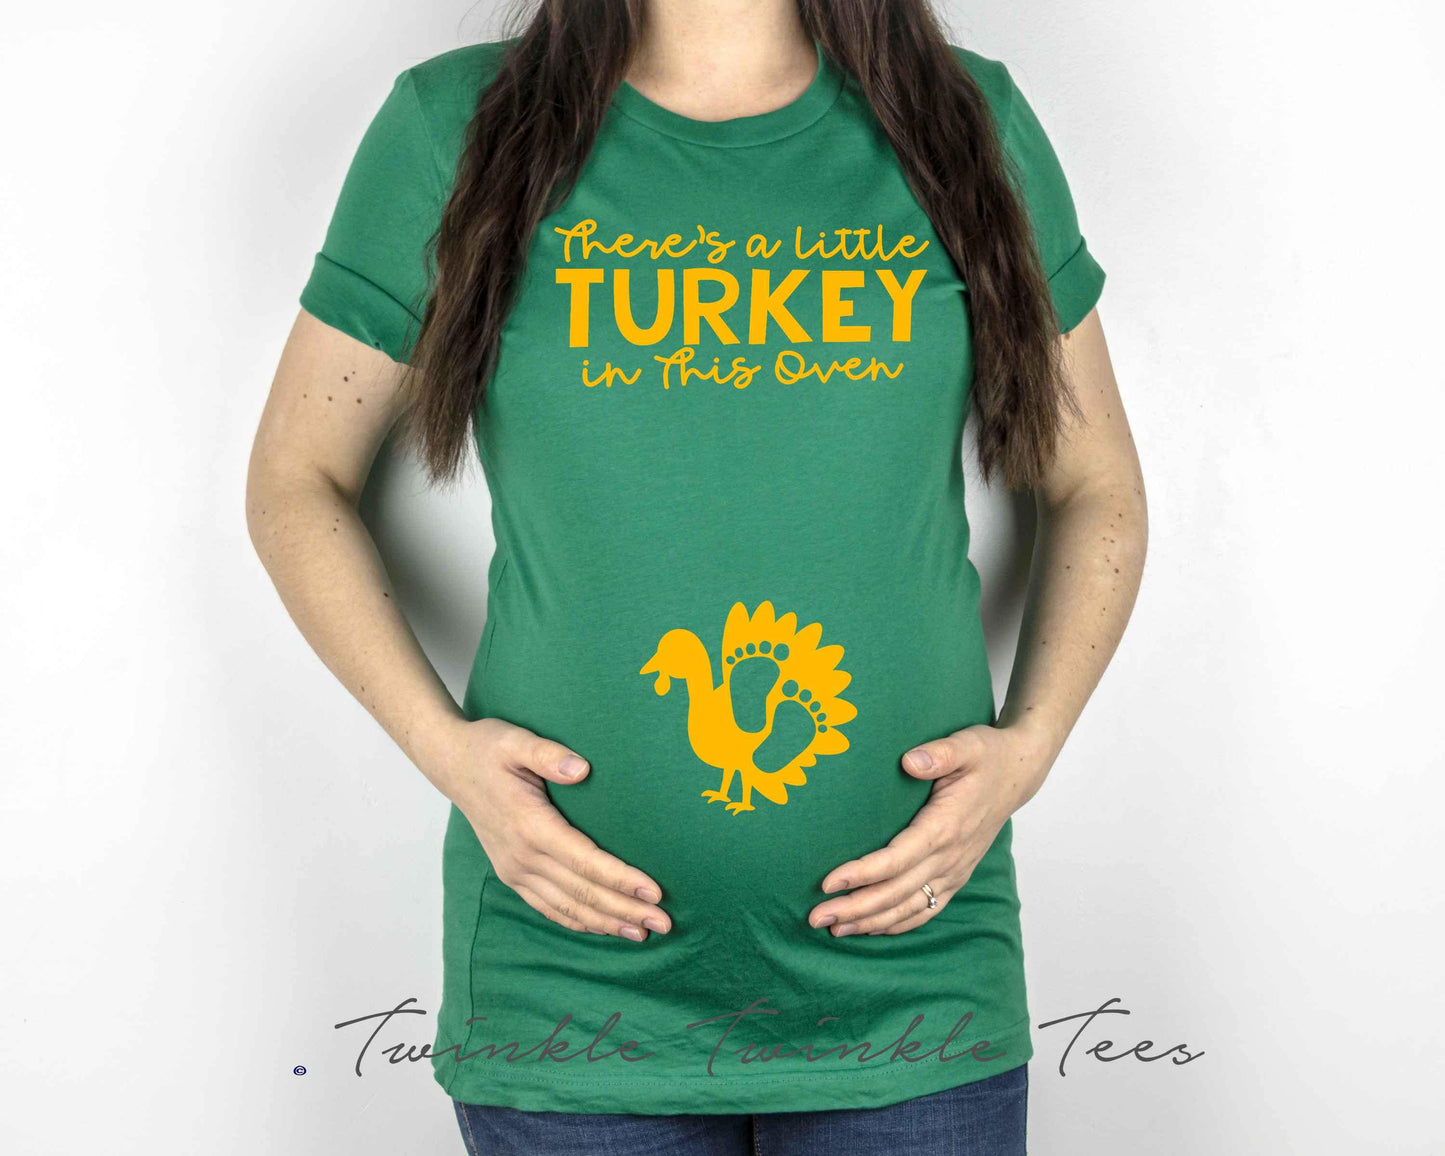 There's a Little Turkey in This Oven t-shirt - thanksgiving pregnancy announcement shirt - pregnancy shirt - maternity shirt